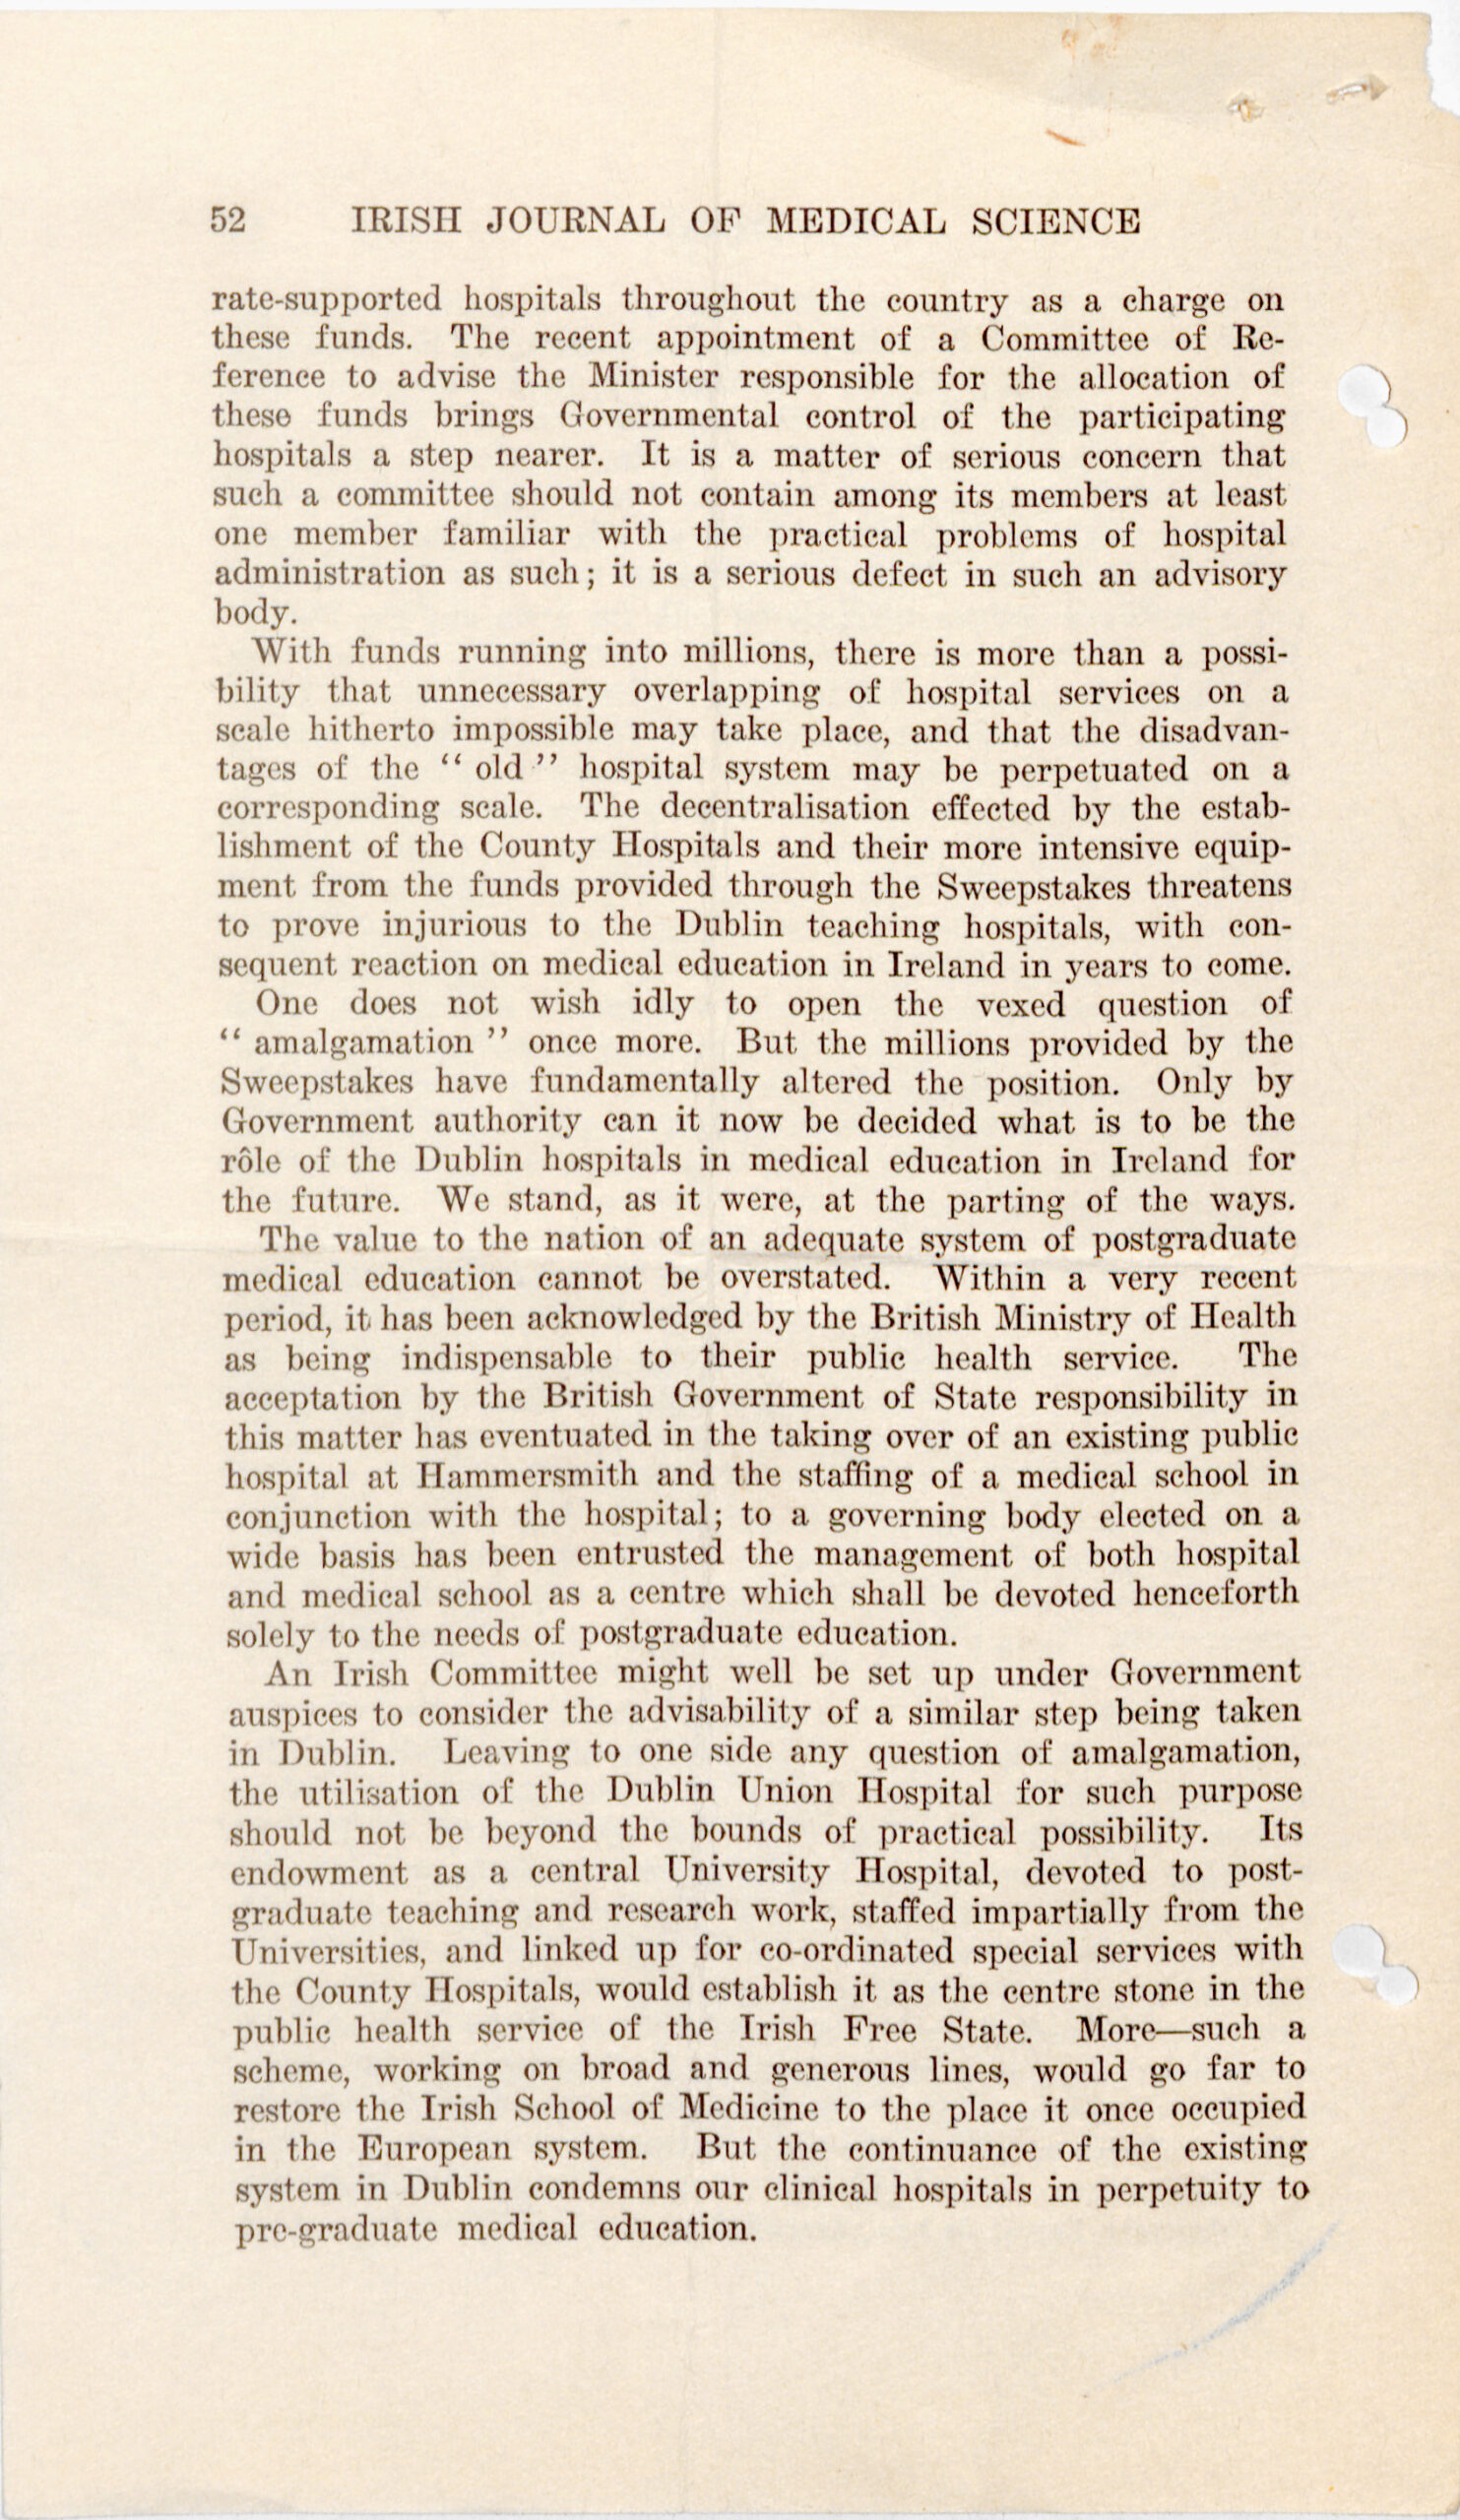 Series of documents from the Irish Journal of Medical Science,1932. Page four of four.